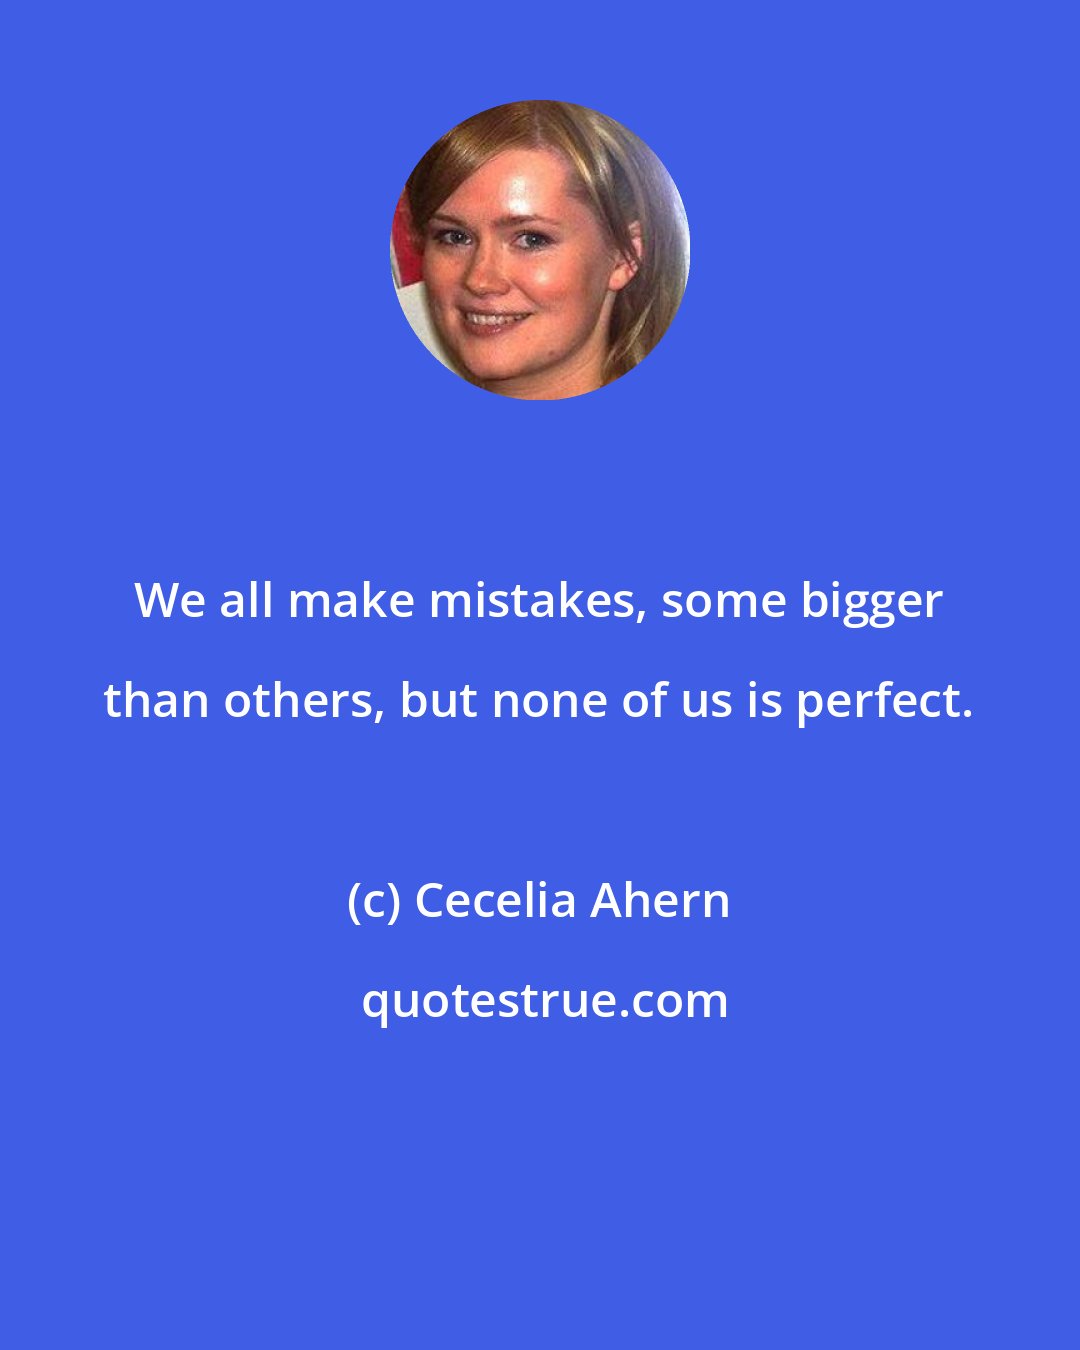 Cecelia Ahern: We all make mistakes, some bigger than others, but none of us is perfect.